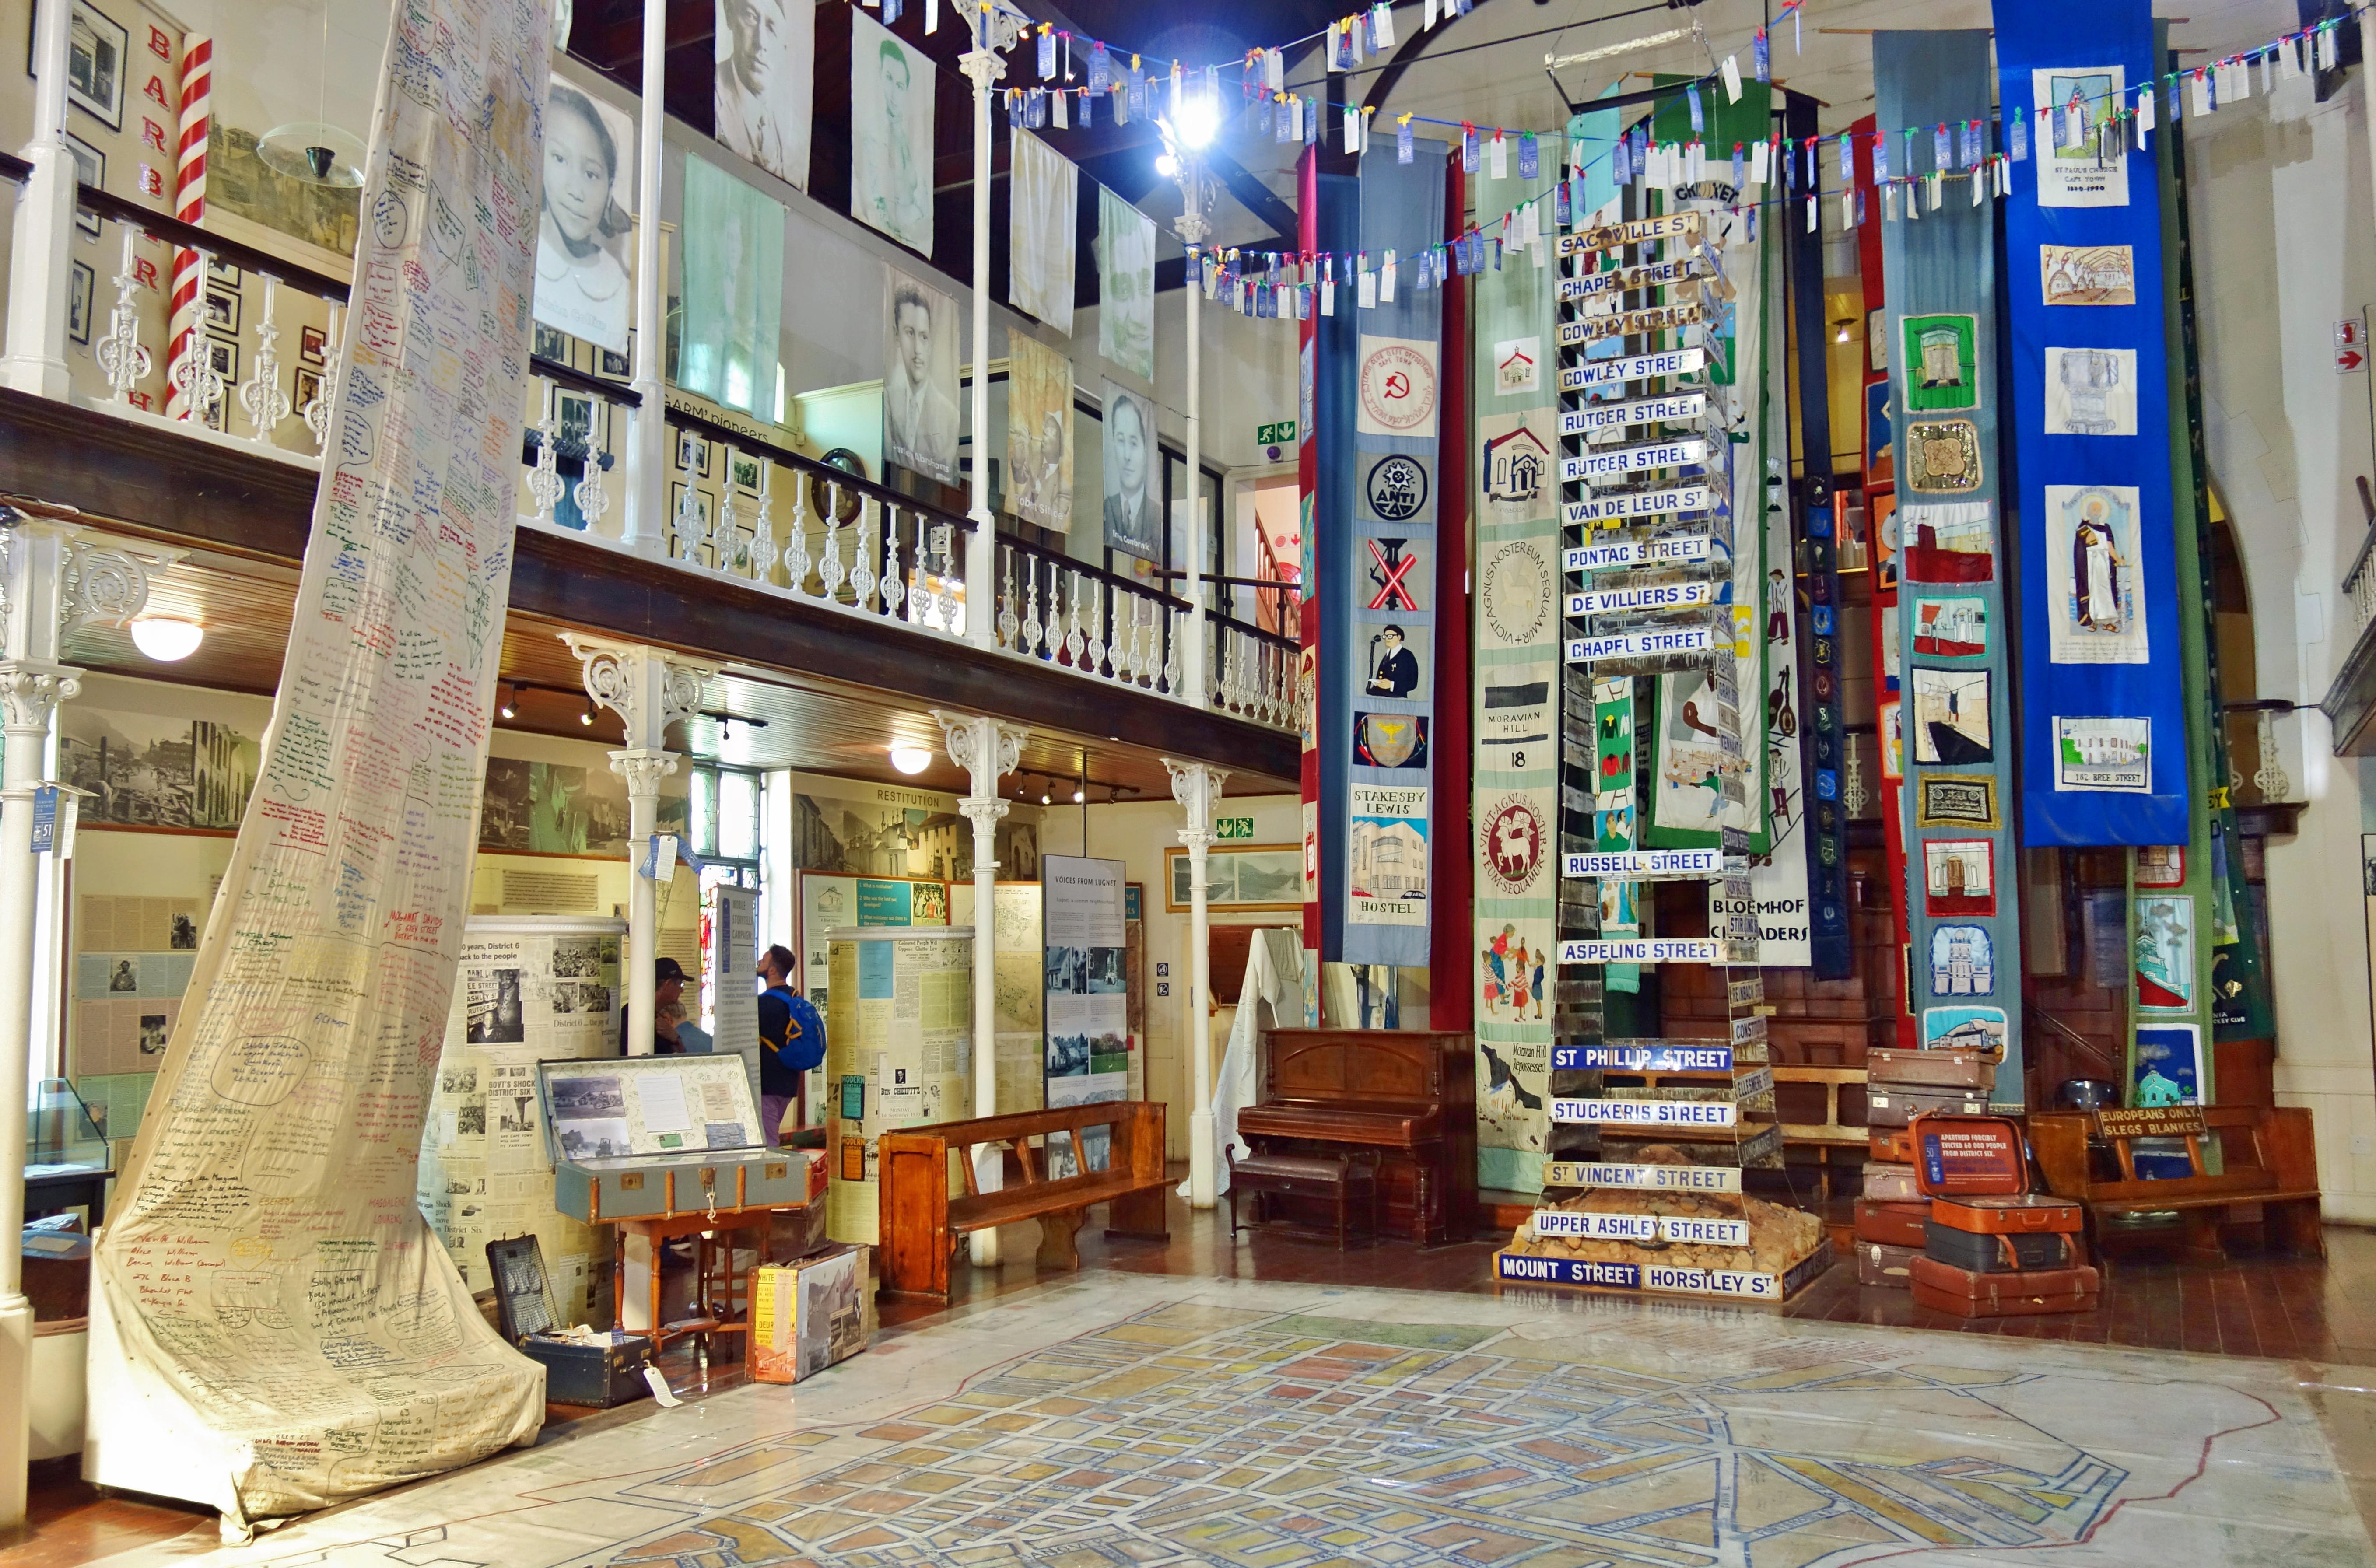 The District Six Museum